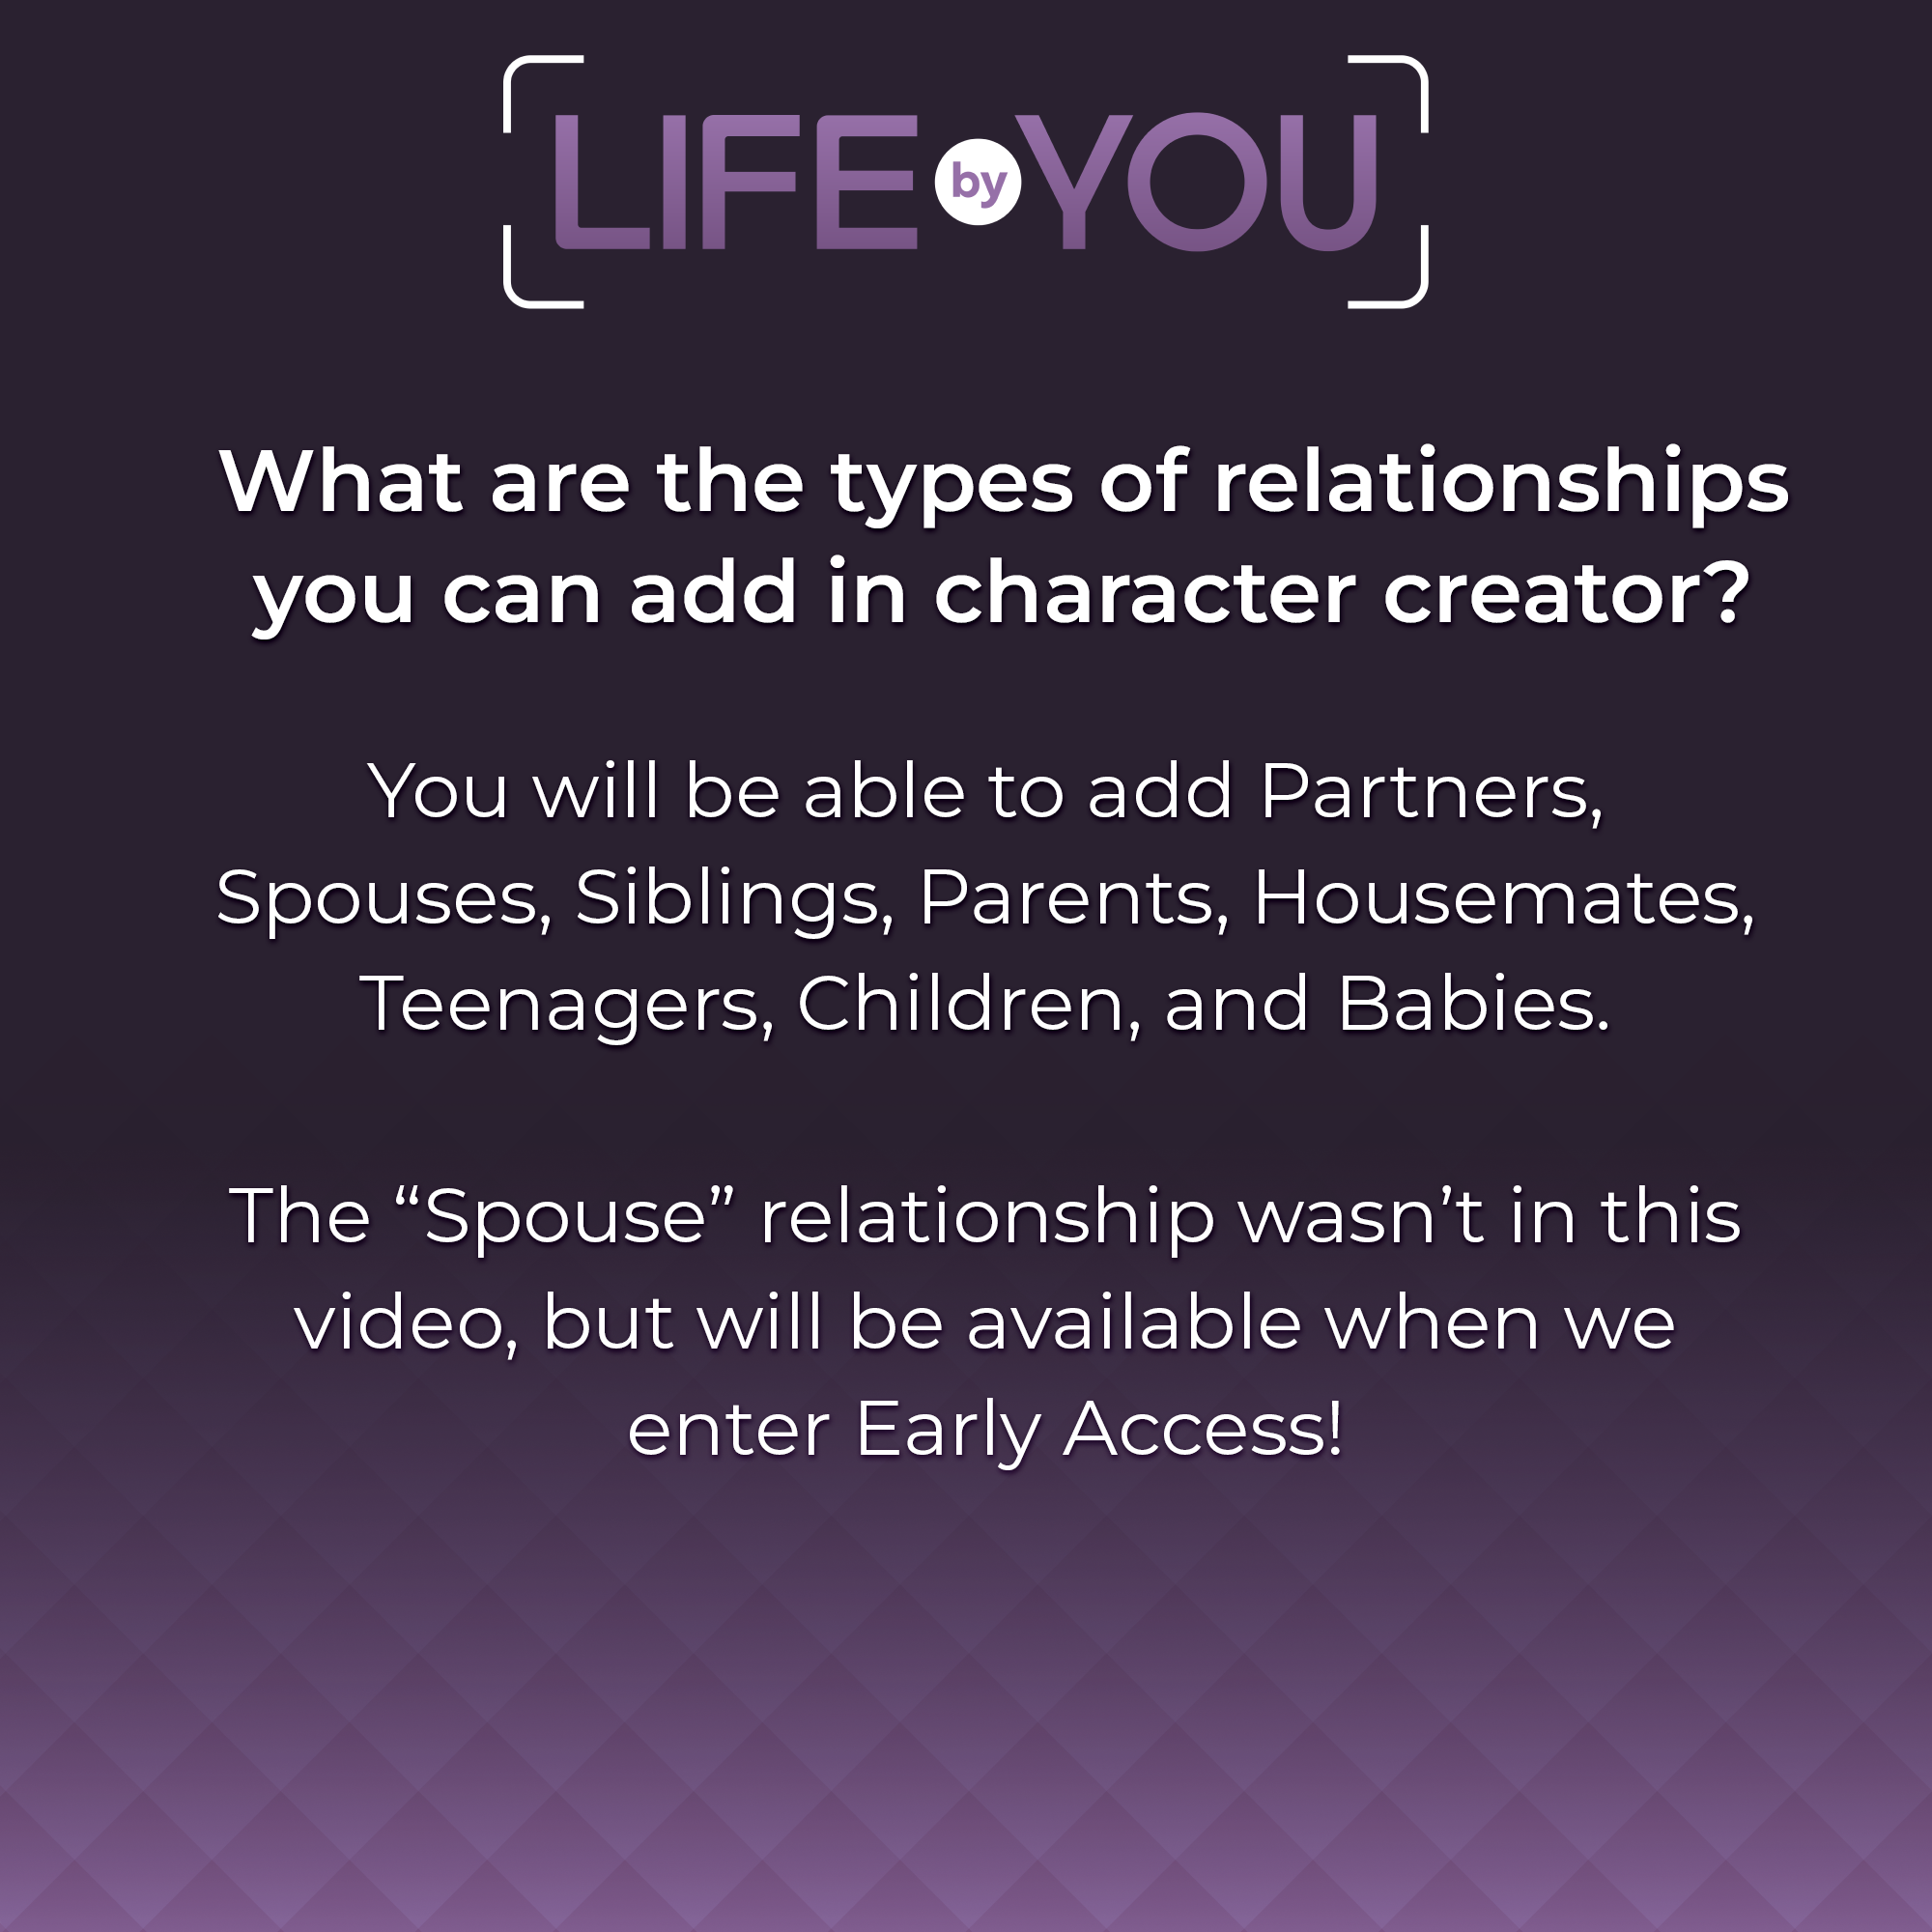 QnA What types of relationships can you add in character creator?